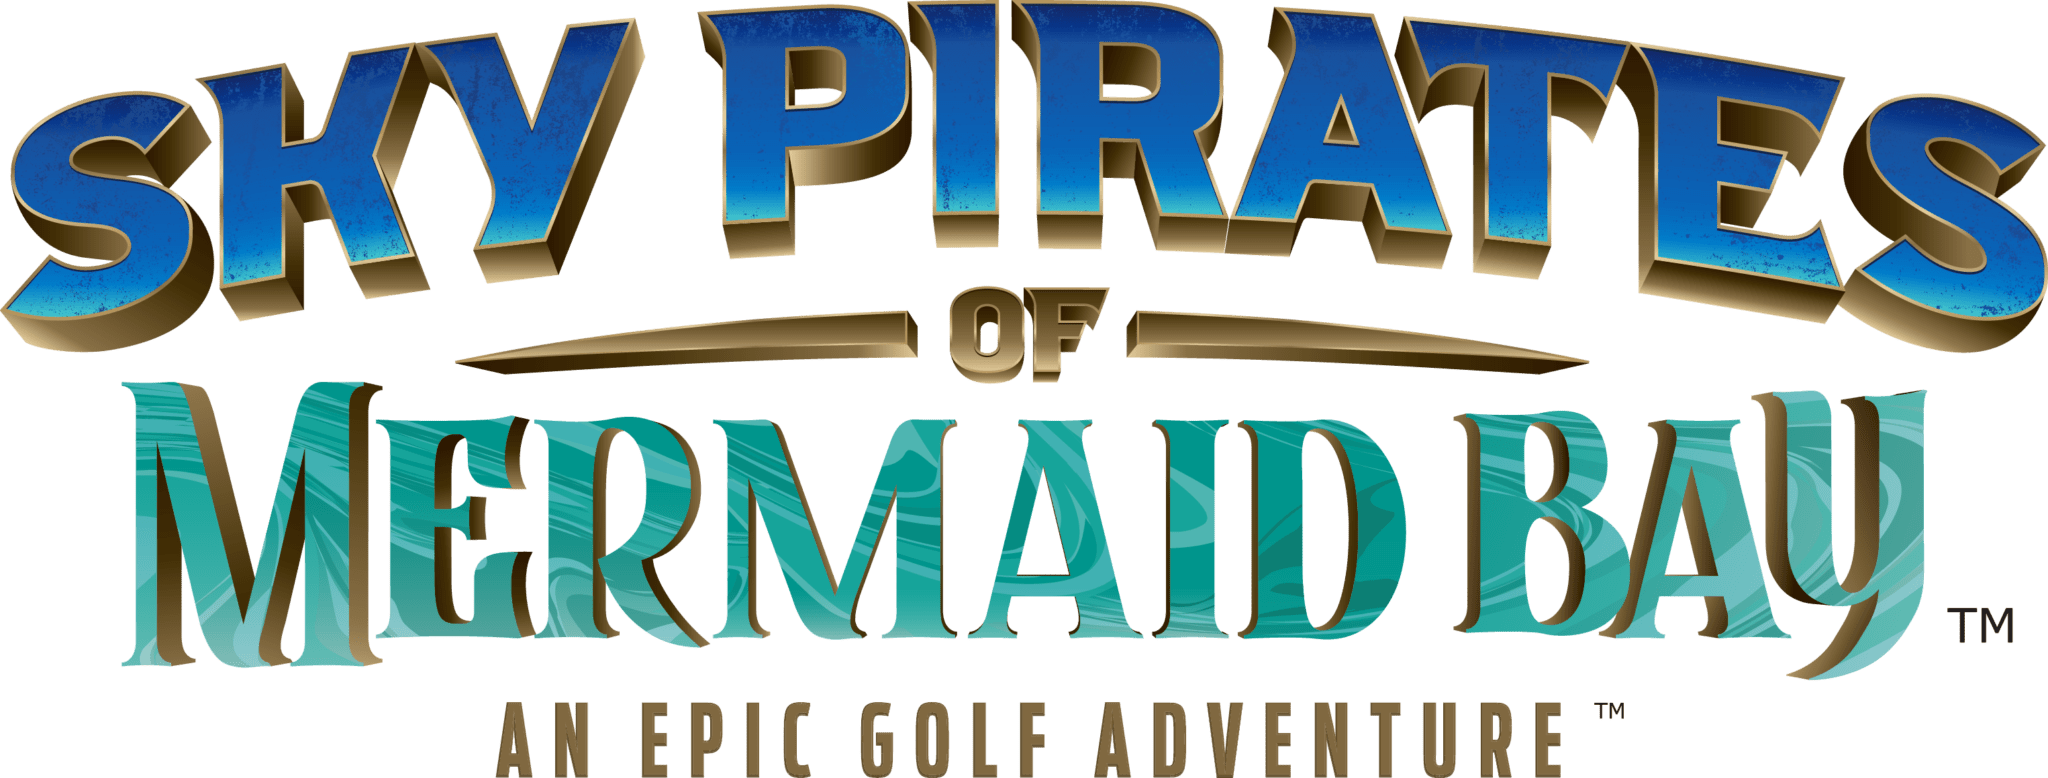 >About Us » Sky Pirates of Mermaid Bay Mini Golf | Pigeon Forge, TN Logo